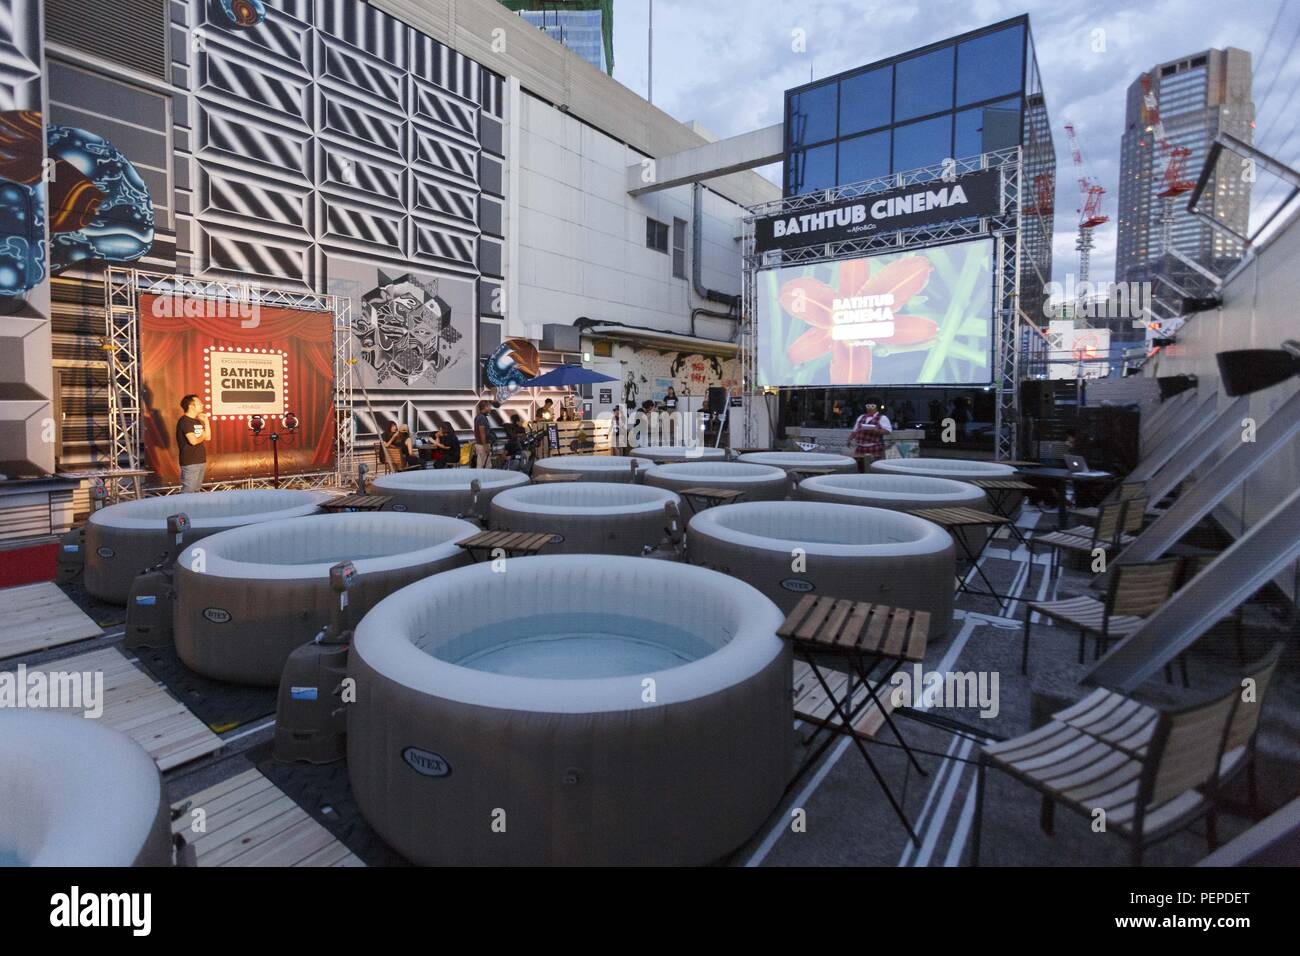 Tokyo Japan 17th Aug 18 Small Inflatable Water Pools For Bathtub Cinema Customers Are Seen On The Rooftop Of The Revamped Magnet By Shibuya109 Building In Tokyo Bathtub Cinema Is Held For